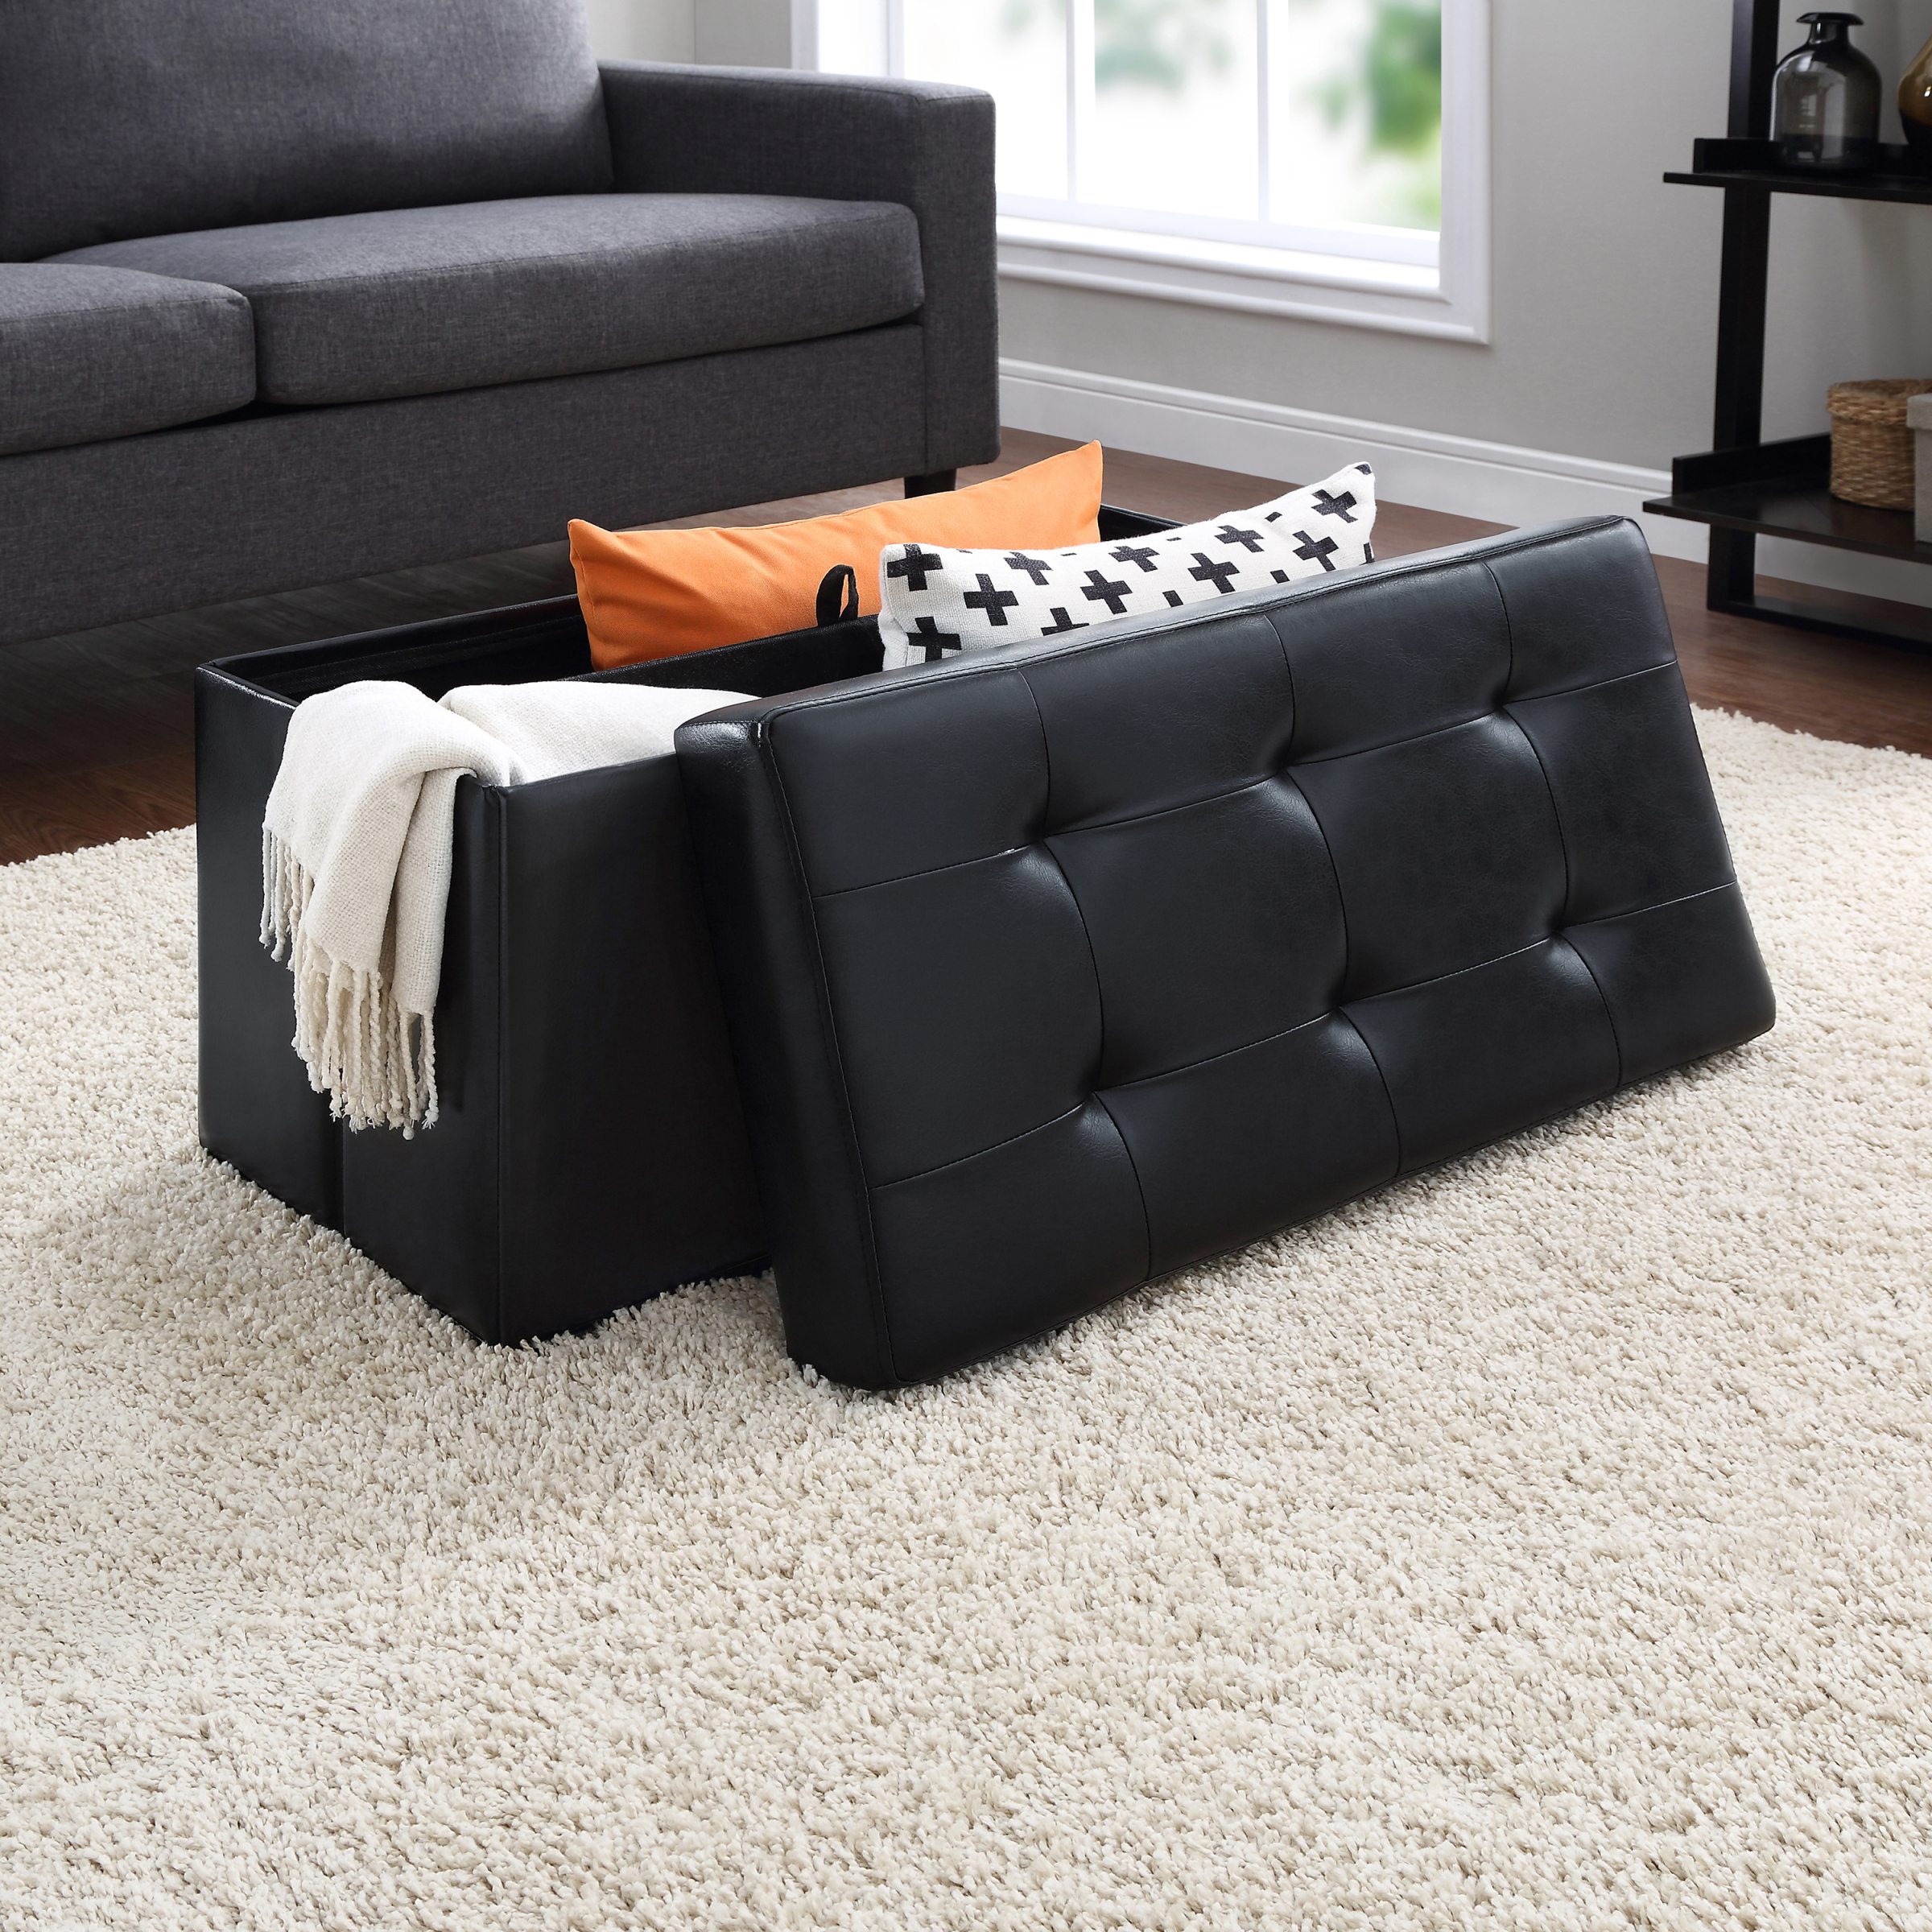 Mainstays 30-inch Collapsible Storage Ottoman, Quilted Black Faux Leather - image 2 of 6